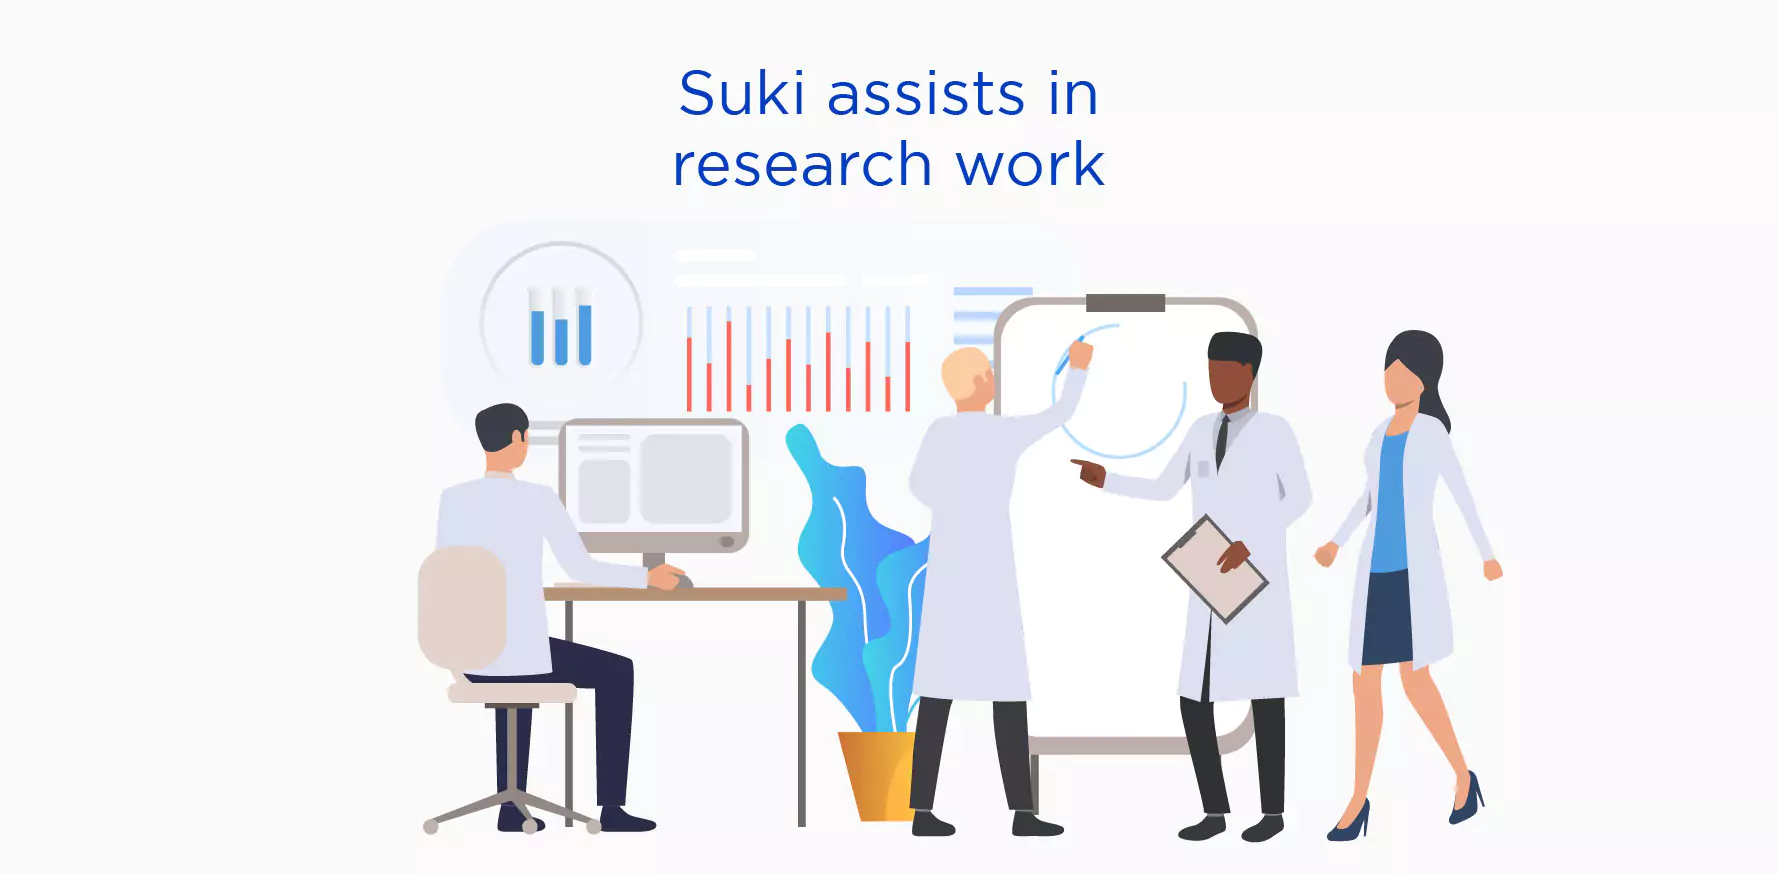 Suki assists in research work